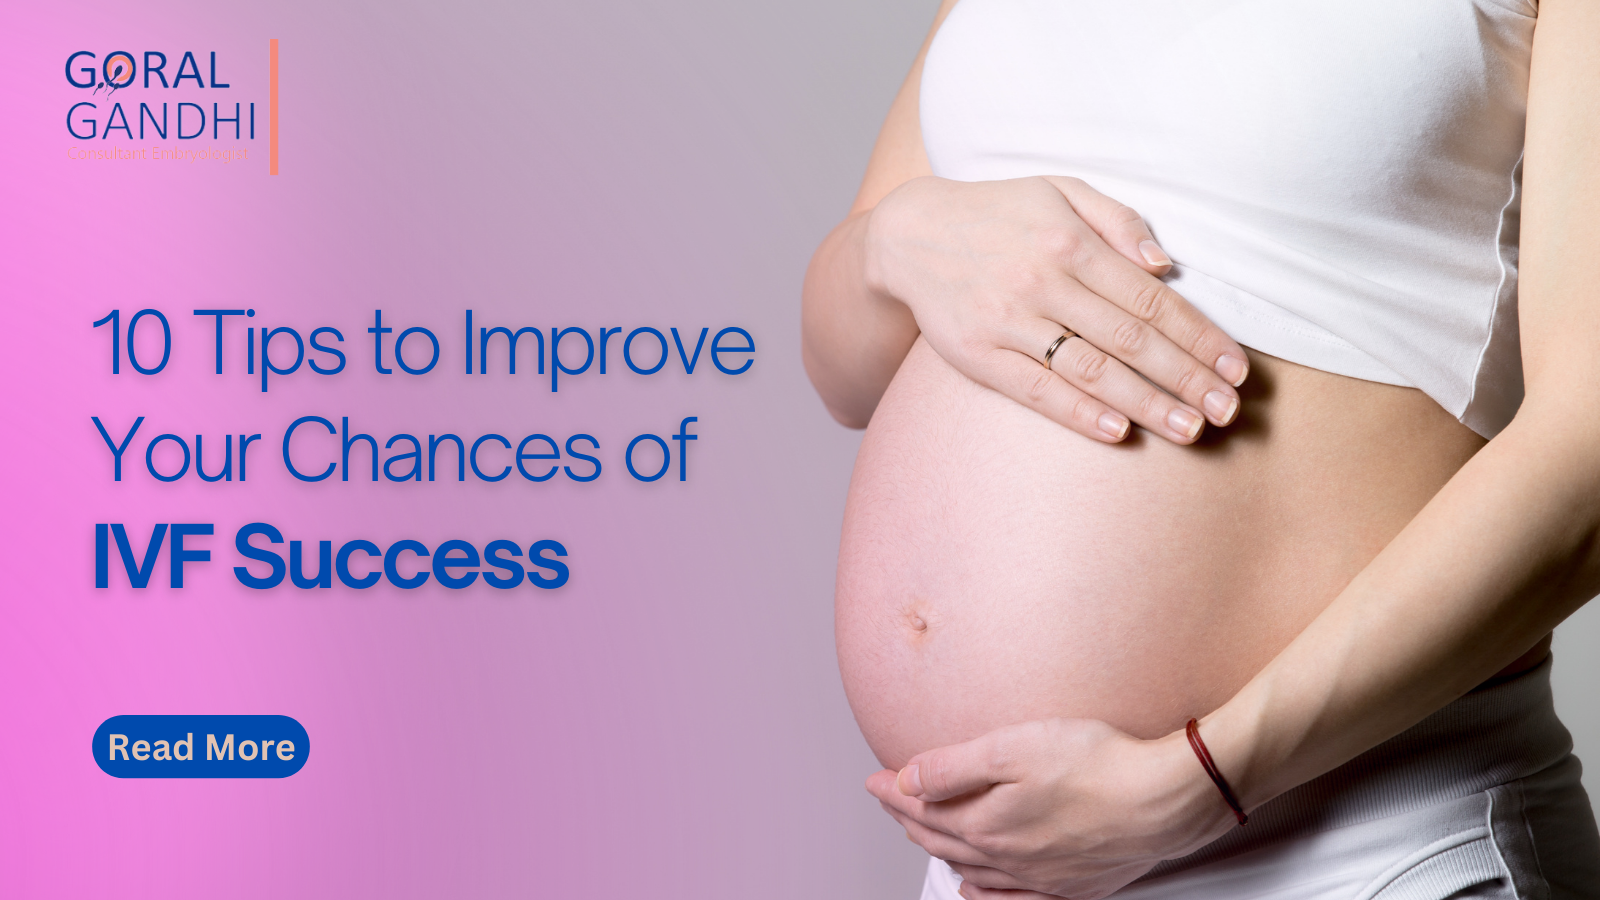 What are the 10 Tips to Improve Your Chances of IVF Success